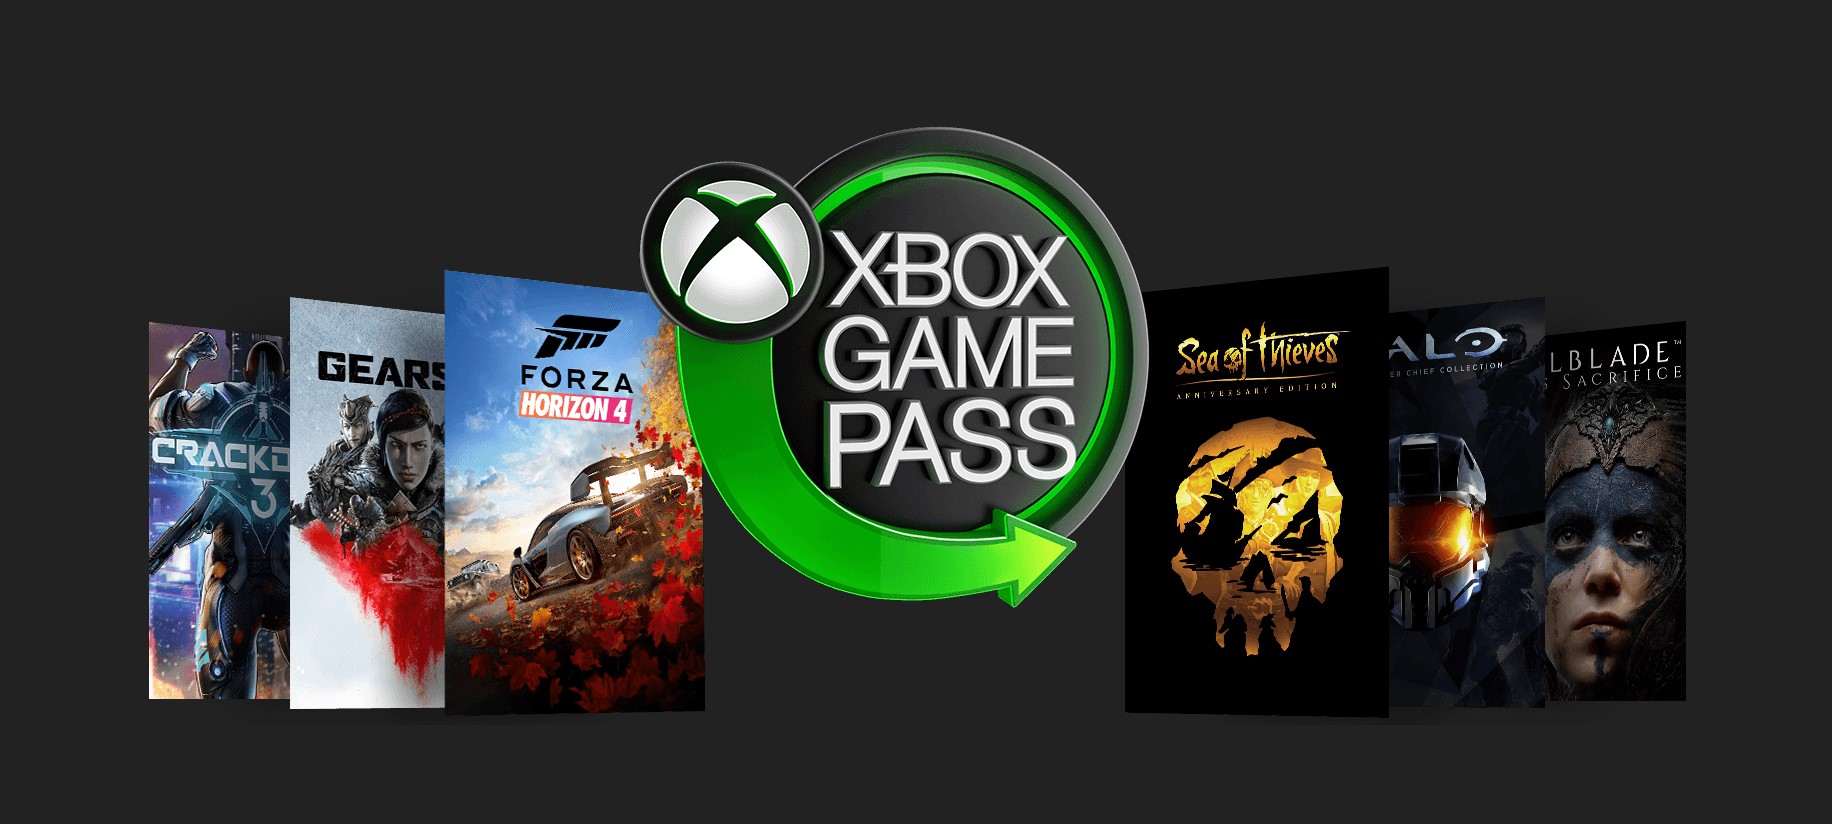 Game Pass. Концепты Xbox game Pass. Xbox game Pass Unlimited.